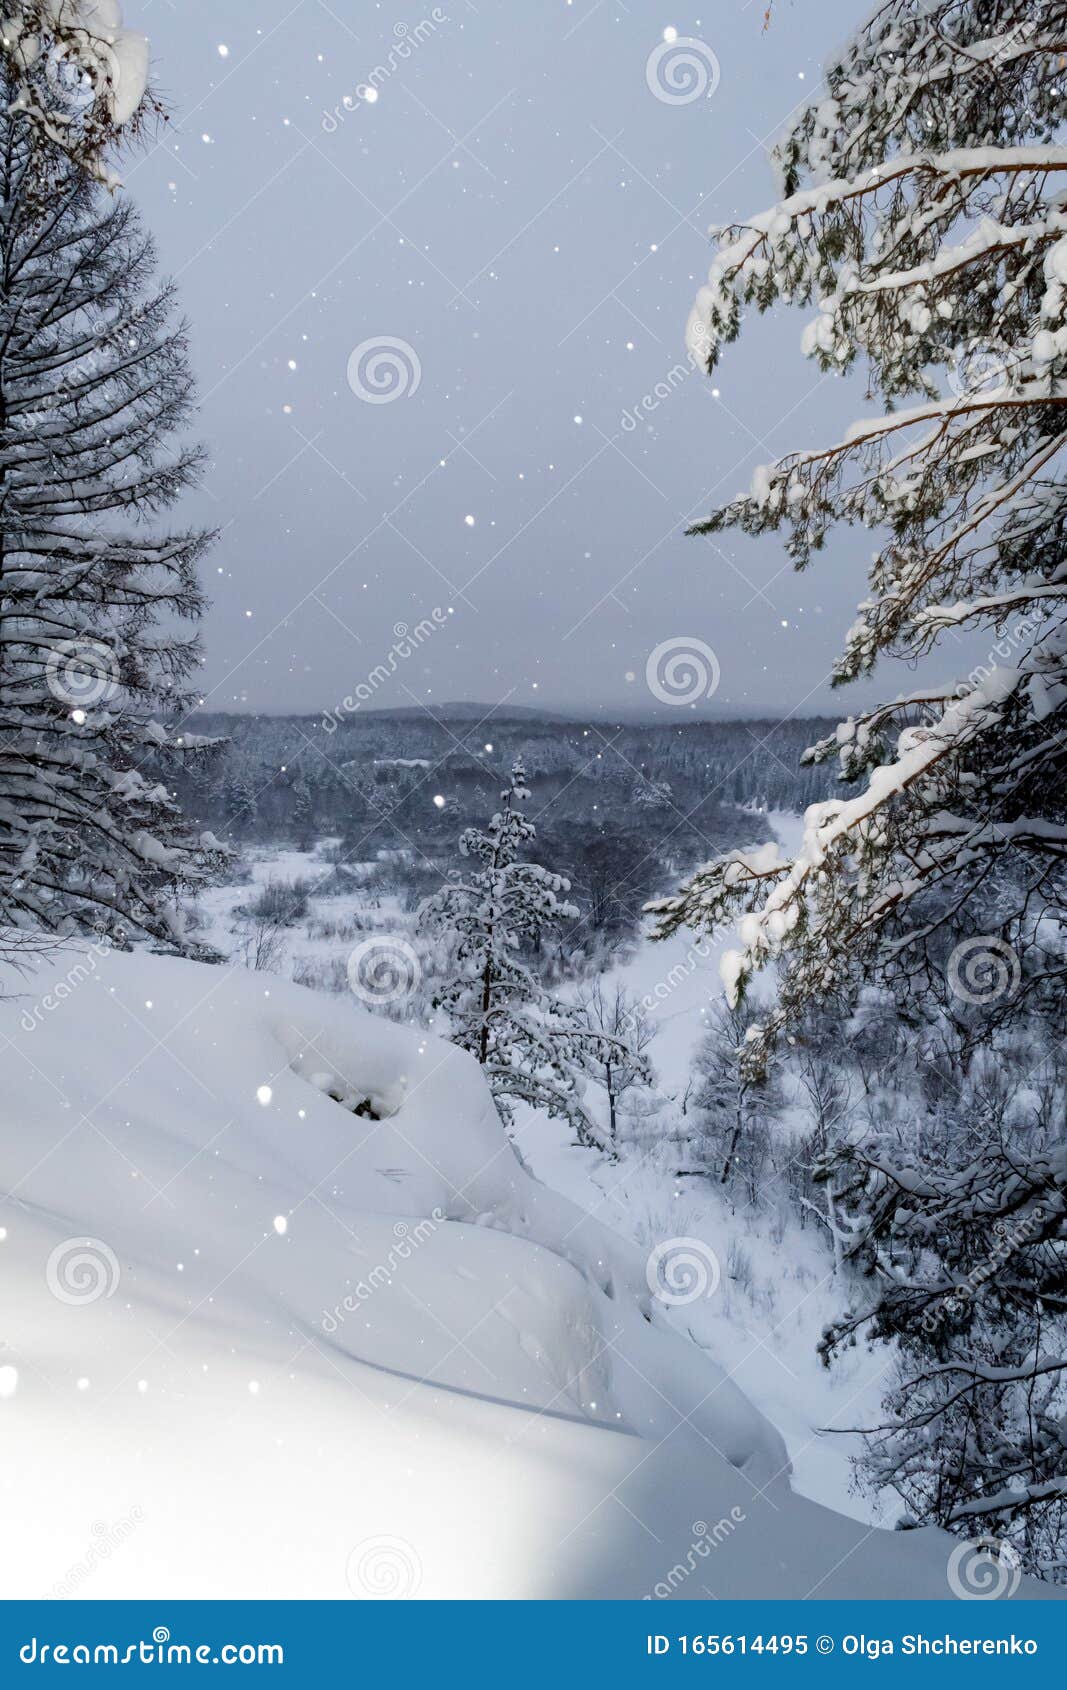 Winter Landscape With Pine Trees Covered In Snow ...